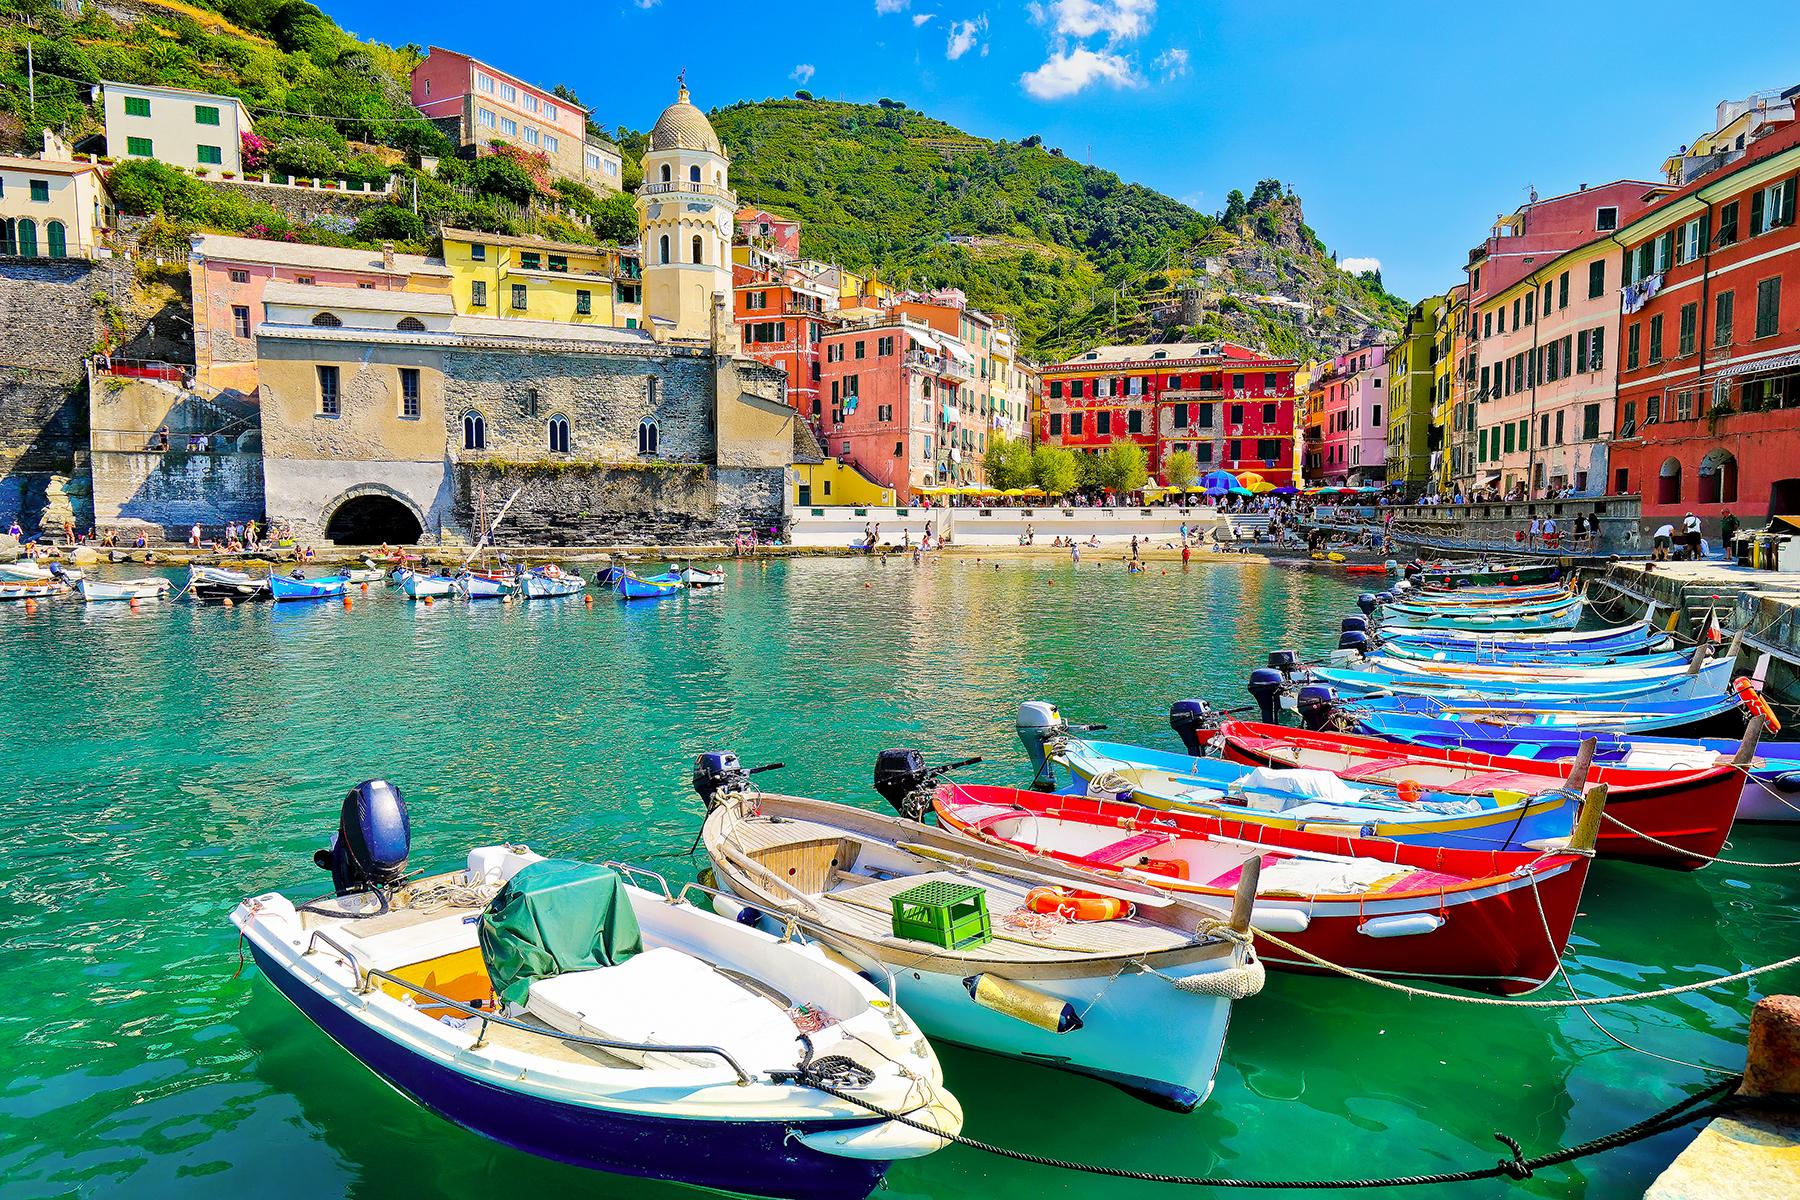 The Best Seaside Towns and Beaches in Italy